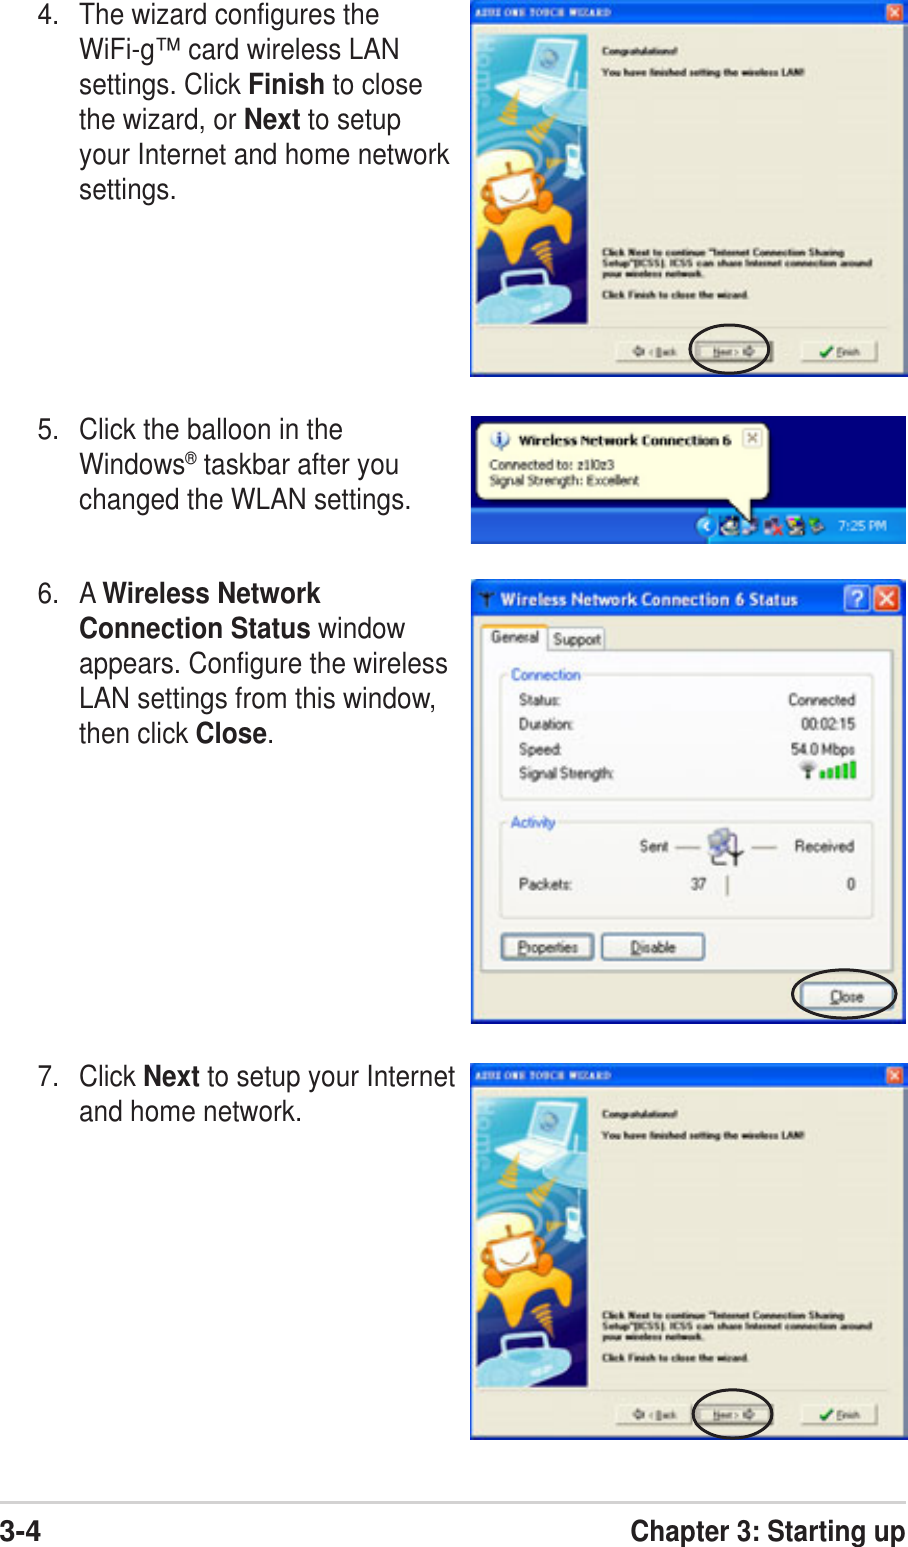 3-4Chapter 3: Starting up4. The wizard configures theWiFi-g™ card wireless LANsettings. Click Finish to closethe wizard, or Next to setupyour Internet and home networksettings.7. Click Next to setup your Internetand home network.5. Click the balloon in theWindows® taskbar after youchanged the WLAN settings.6. A Wireless NetworkConnection Status windowappears. Configure the wirelessLAN settings from this window,then click Close.